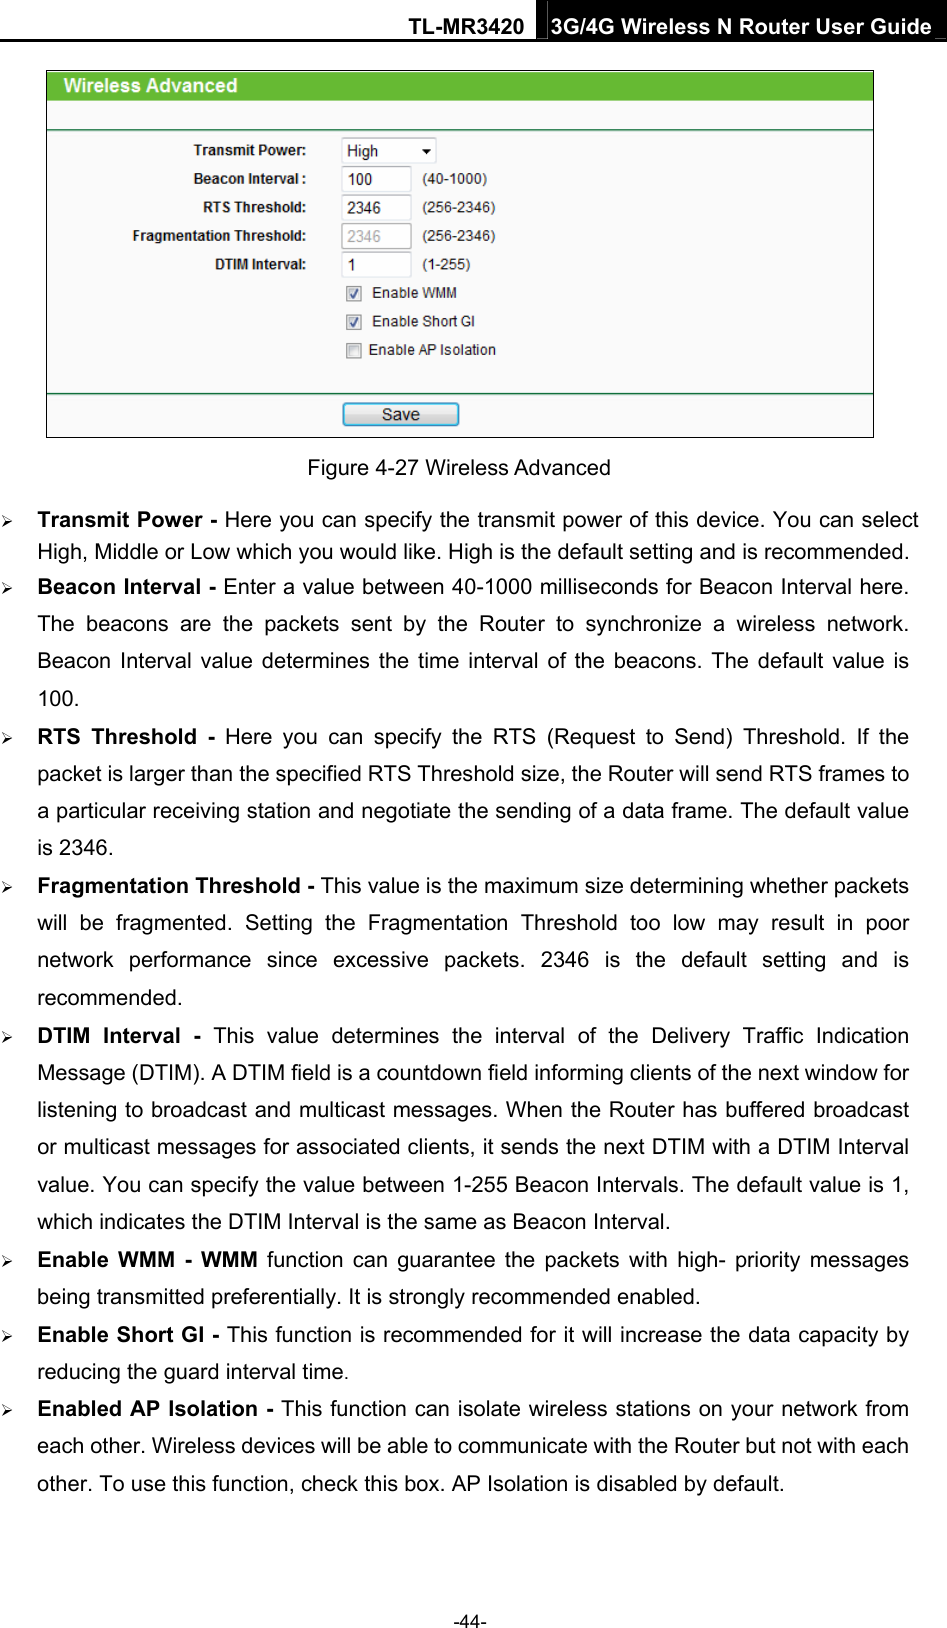 TL-MR3420 3G/4G Wireless N Router User Guide  Figure 4-27 Wireless Advanced  Transmit Power - Here you can specify the transmit power of this device. You can select High, Middle or Low which you would like. High is the default setting and is recommended.    Beacon Interval - Enter a value between 40-1000 milliseconds for Beacon Interval here. The beacons are the packets sent by the Router to synchronize a wireless network. Beacon Interval value determines the time interval of the beacons. The default value is 100.   RTS Threshold - Here you can specify the RTS (Request to Send) Threshold. If the packet is larger than the specified RTS Threshold size, the Router will send RTS frames to a particular receiving station and negotiate the sending of a data frame. The default value is 2346.    Fragmentation Threshold - This value is the maximum size determining whether packets will be fragmented. Setting the Fragmentation Threshold too low may result in poor network performance since excessive packets. 2346 is the default setting and is recommended.   DTIM Interval - This value determines the interval of the Delivery Traffic Indication Message (DTIM). A DTIM field is a countdown field informing clients of the next window for listening to broadcast and multicast messages. When the Router has buffered broadcast or multicast messages for associated clients, it sends the next DTIM with a DTIM Interval value. You can specify the value between 1-255 Beacon Intervals. The default value is 1, which indicates the DTIM Interval is the same as Beacon Interval.    Enable WMM - WMM function can guarantee the packets with high- priority messages being transmitted preferentially. It is strongly recommended enabled.    Enable Short GI - This function is recommended for it will increase the data capacity by reducing the guard interval time.   Enabled AP Isolation - This function can isolate wireless stations on your network from each other. Wireless devices will be able to communicate with the Router but not with each other. To use this function, check this box. AP Isolation is disabled by default. -44- 